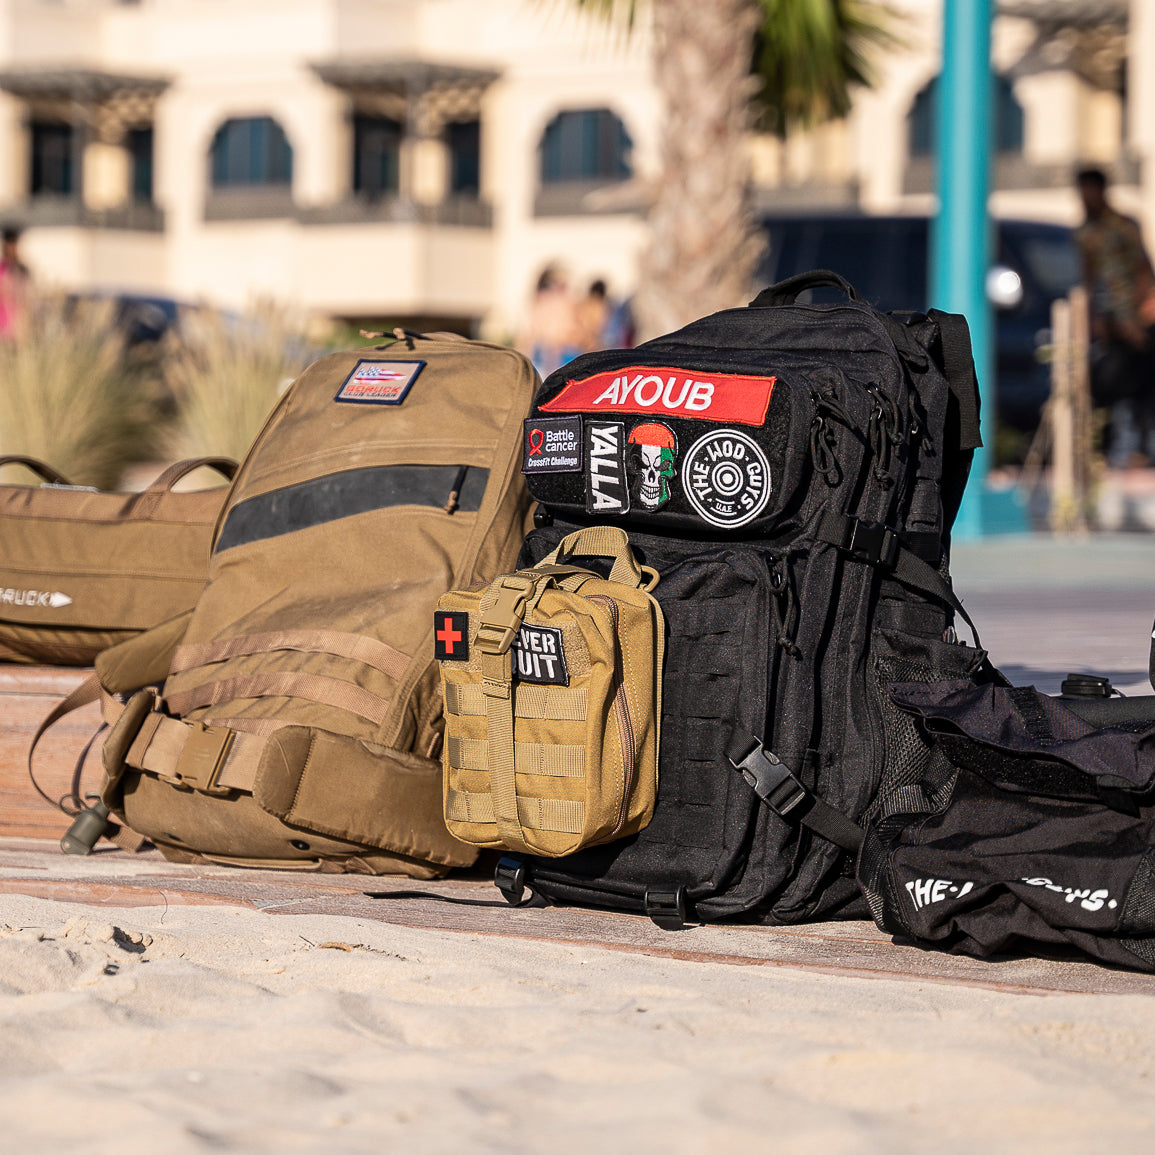 CrossFit Bags and Backpacks in the Middle East - The WOD Guys